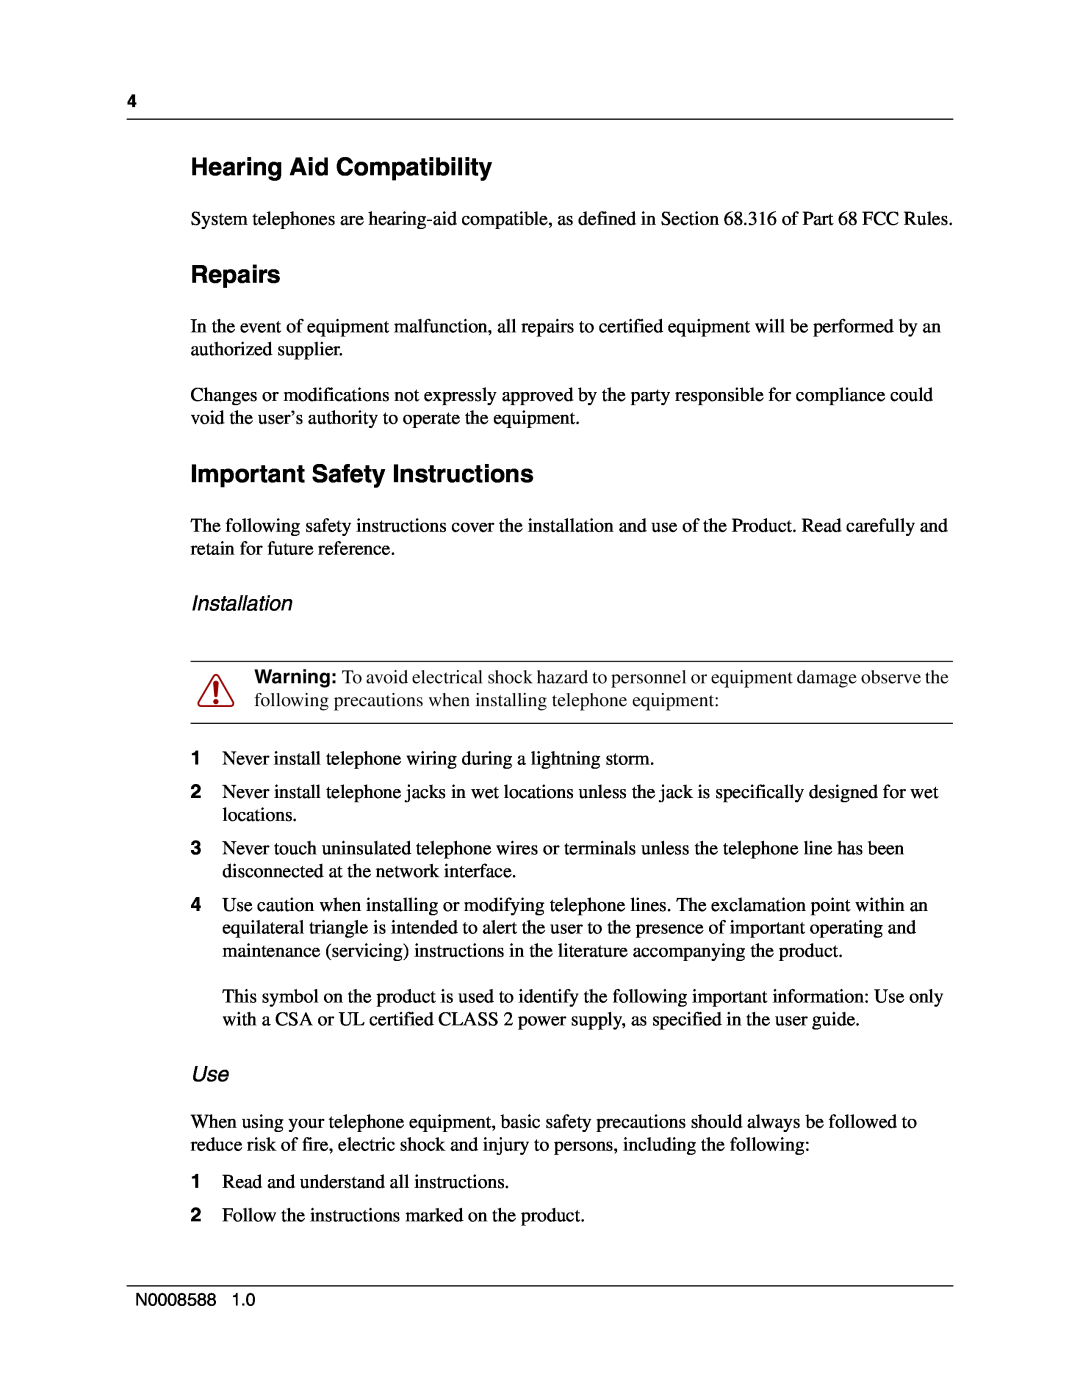 Nortel Networks MOG7xx, MOG6xx manual Hearing Aid Compatibility, Repairs, Important Safety Instructions, Installation 